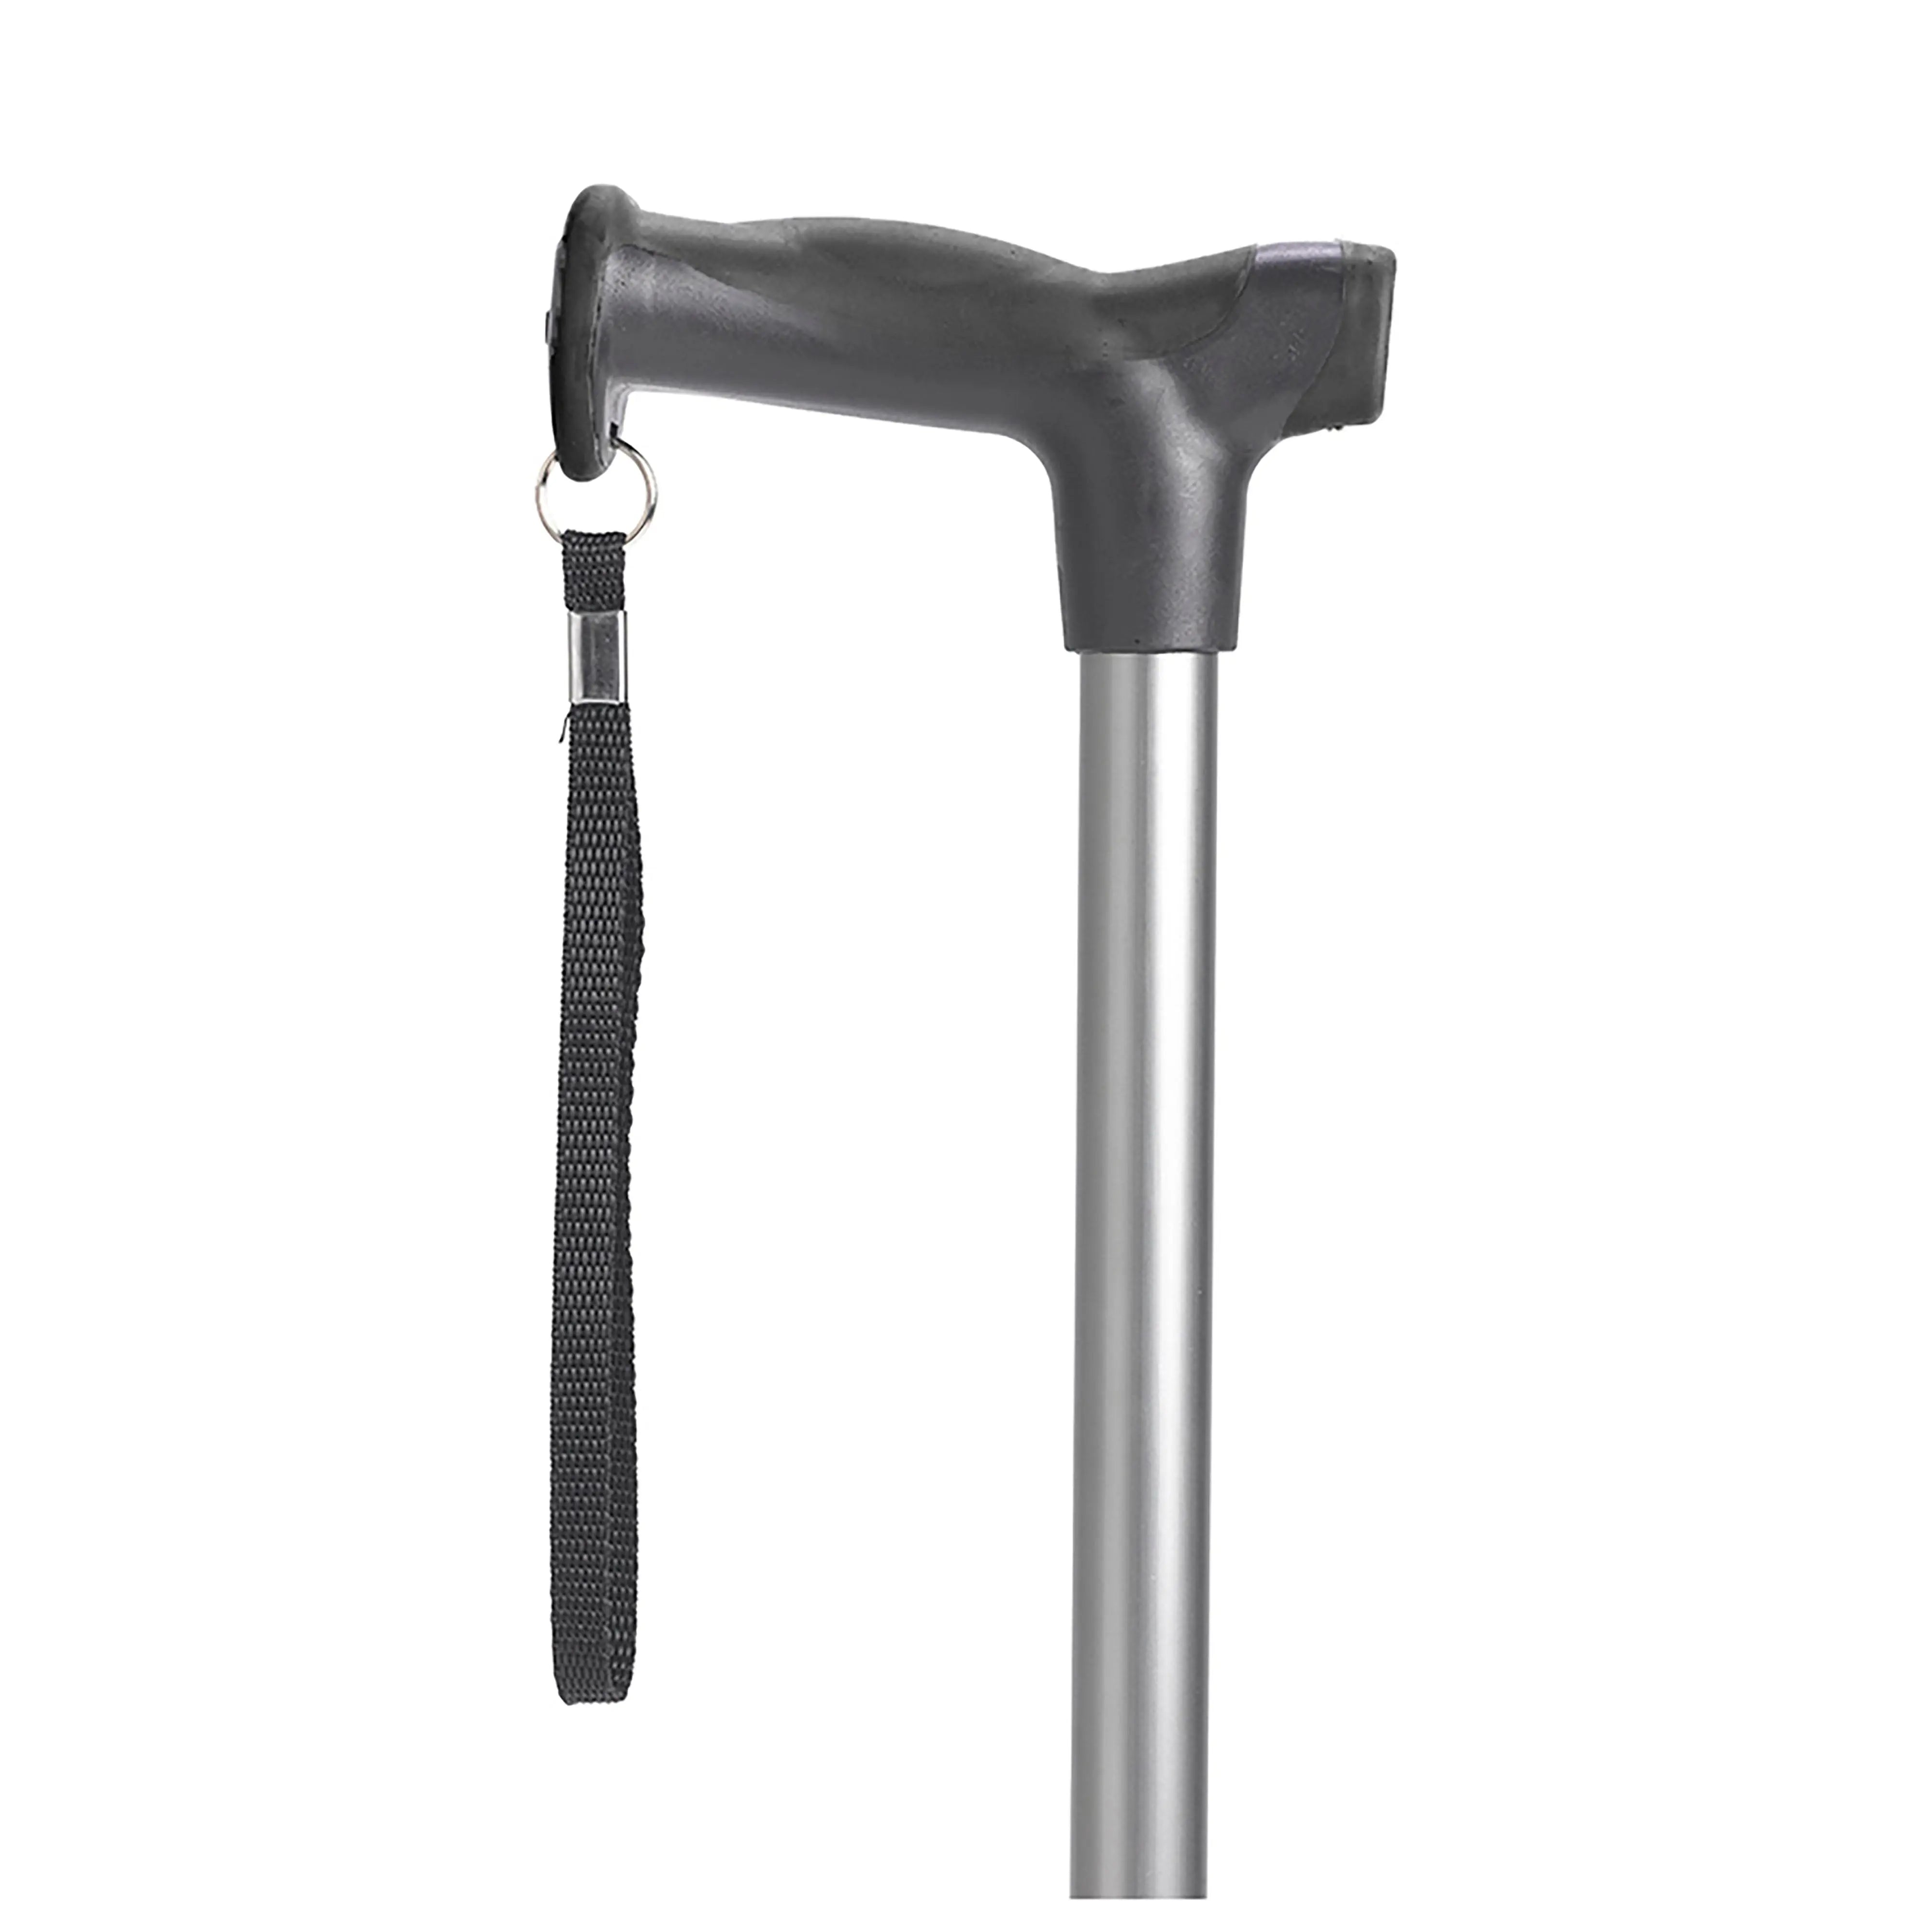 Comfort Grip T Handle Cane - Home Health Store Inc